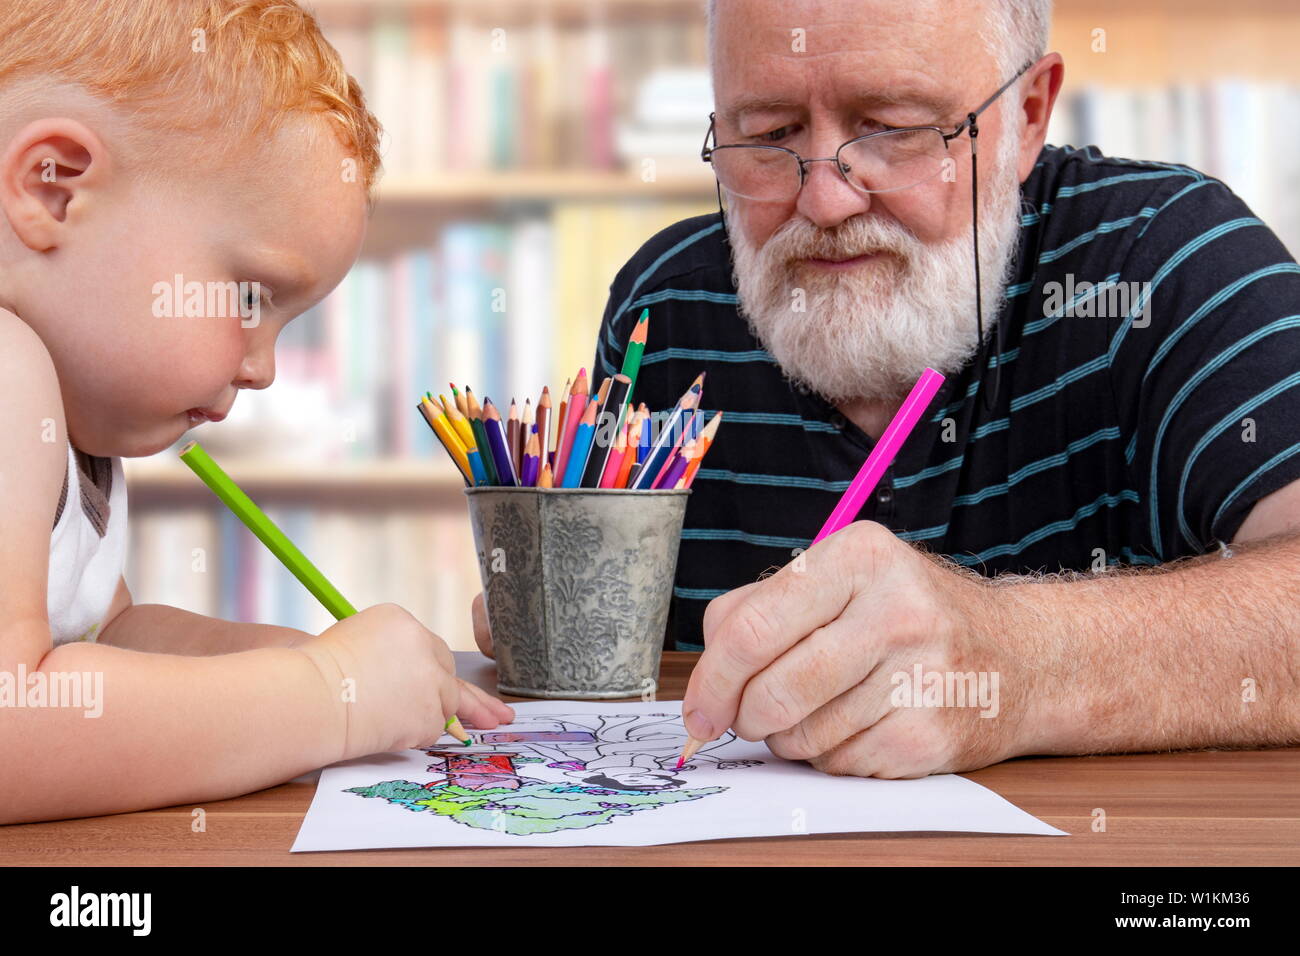 Grandpa working together and coloring on a drawing with his little grandson Stock Photo